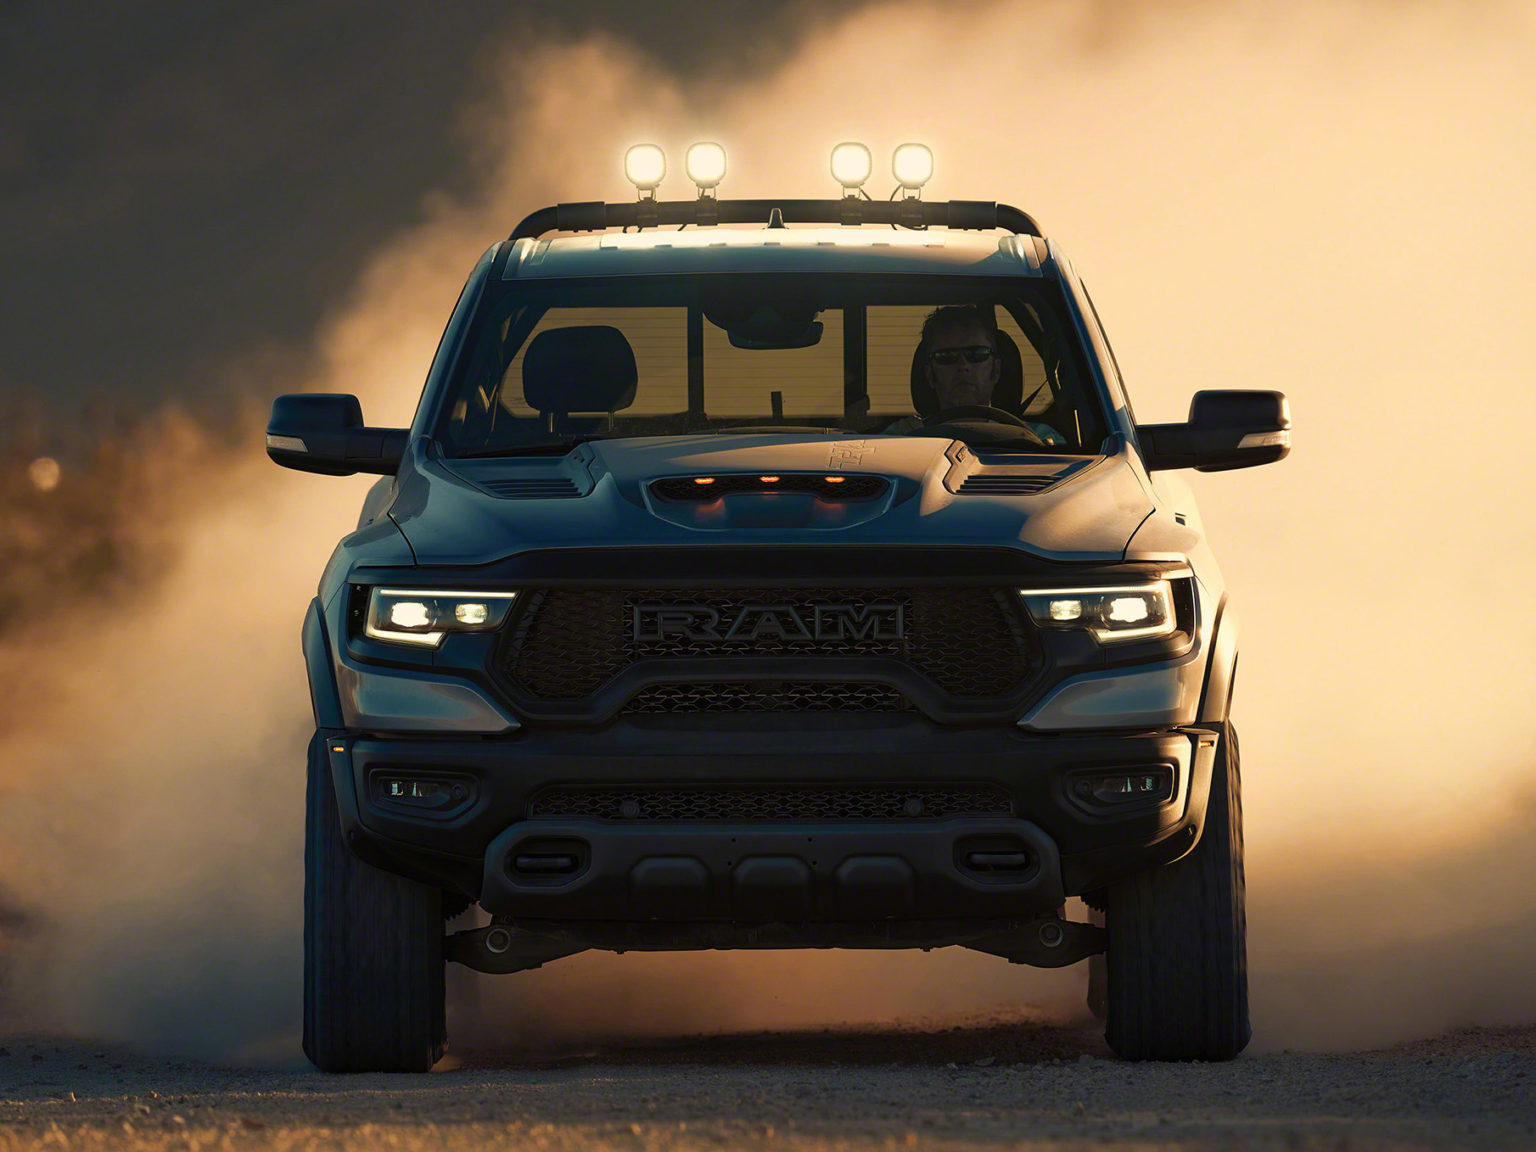 The 2021 Ram 1500 TRX is a compelling truck for off-road enthusiasts.